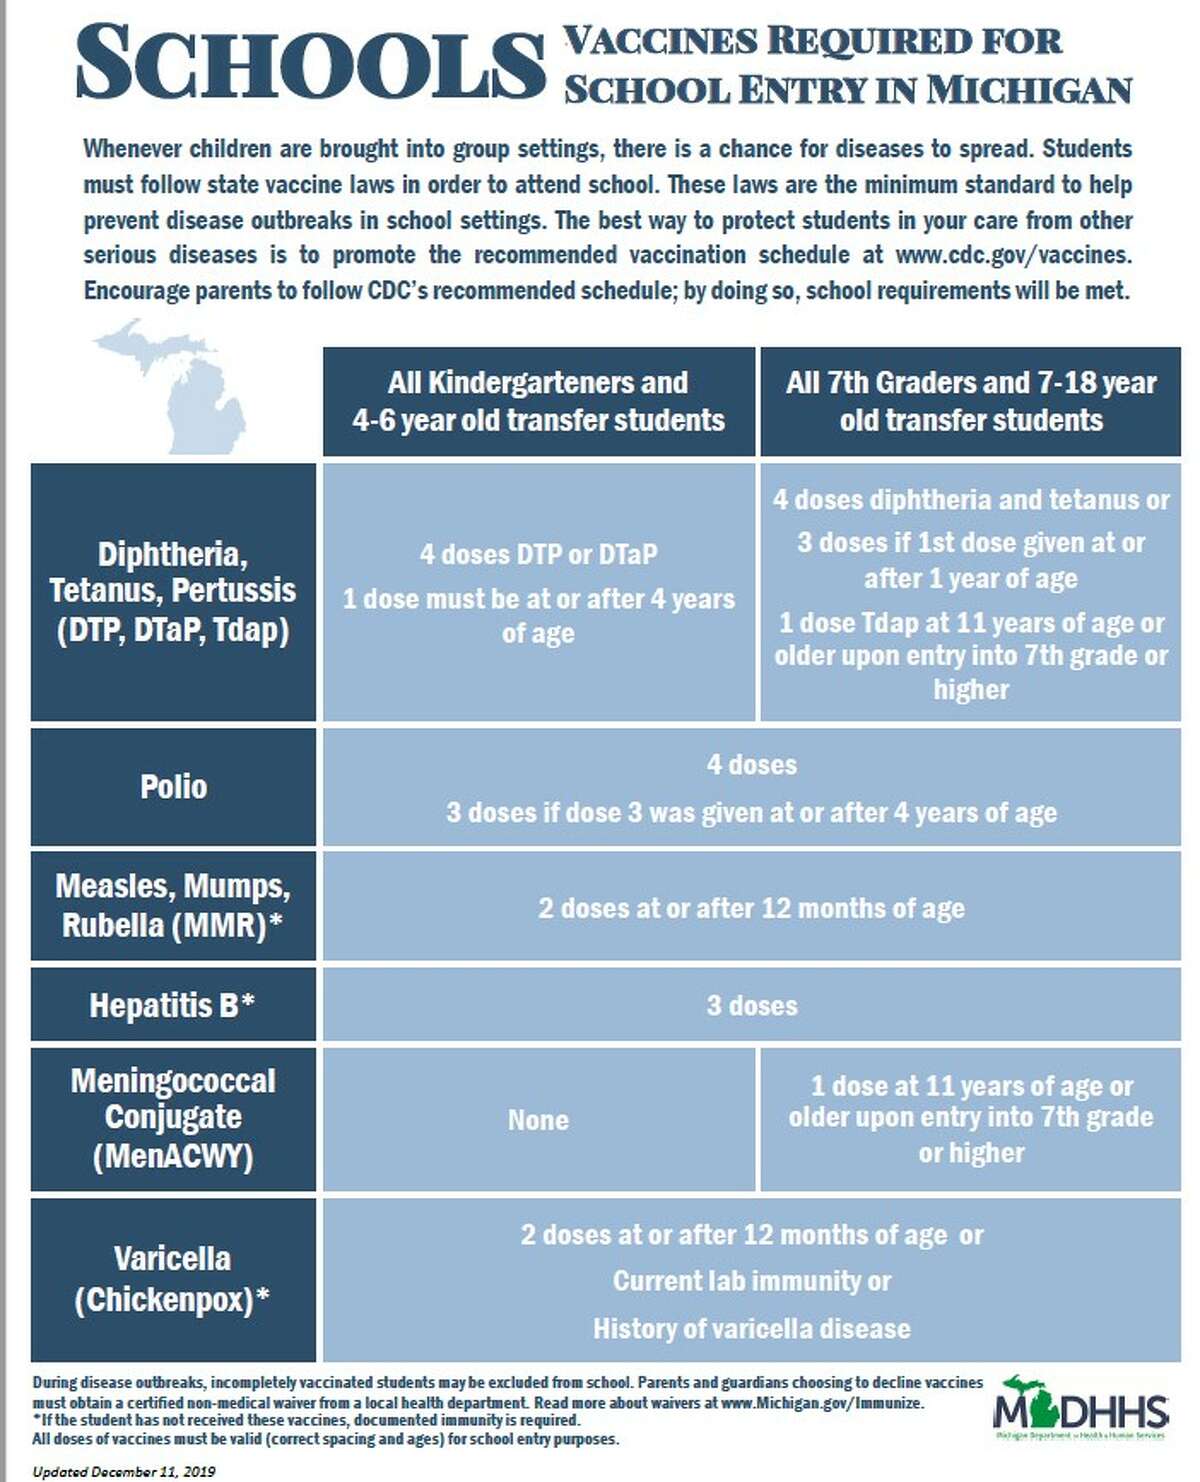 The Michigan Department of Health and Human Services, in the flyer pictured here, lists the required vaccines that children need to attend public schools. However, many parents can sign waivers to get their children exempt from the vaccines.